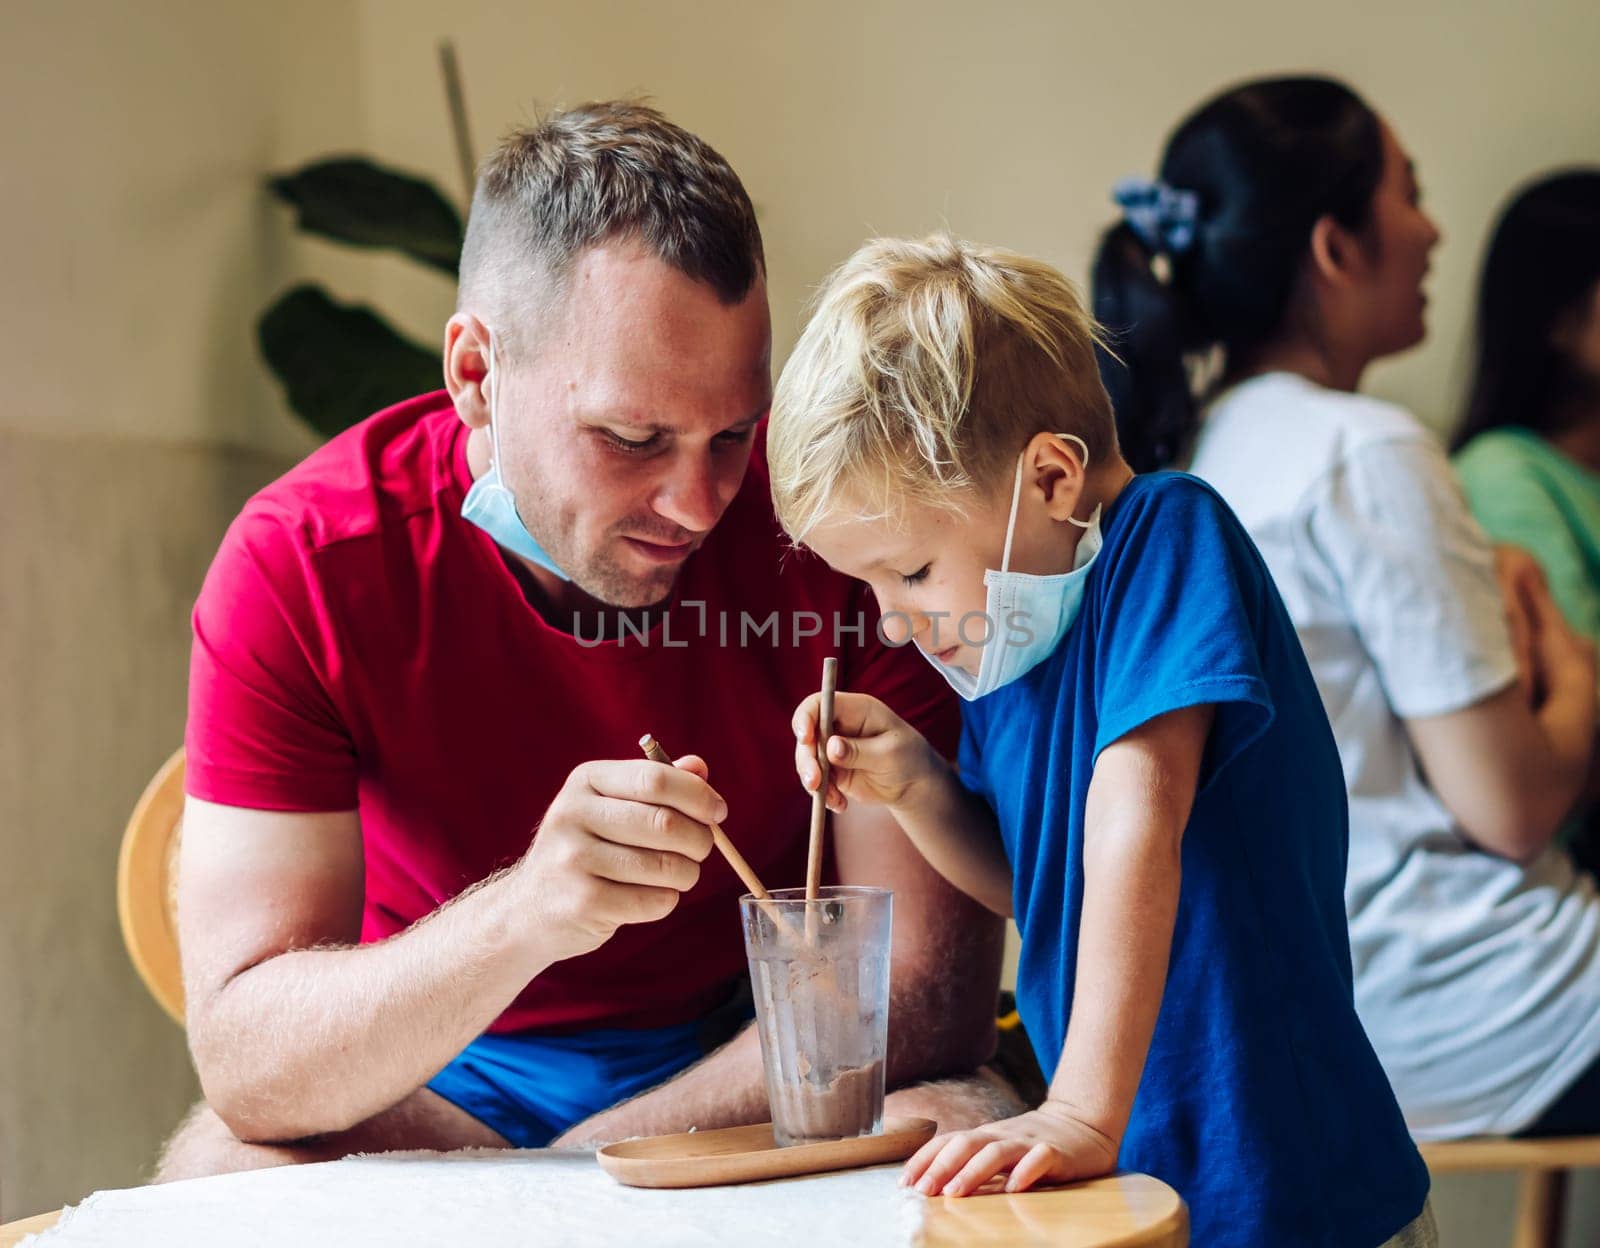 Father and son eat chocolate dessert with spoons in Cafe. Spending time together. Sweet tooth. Happy childhood.